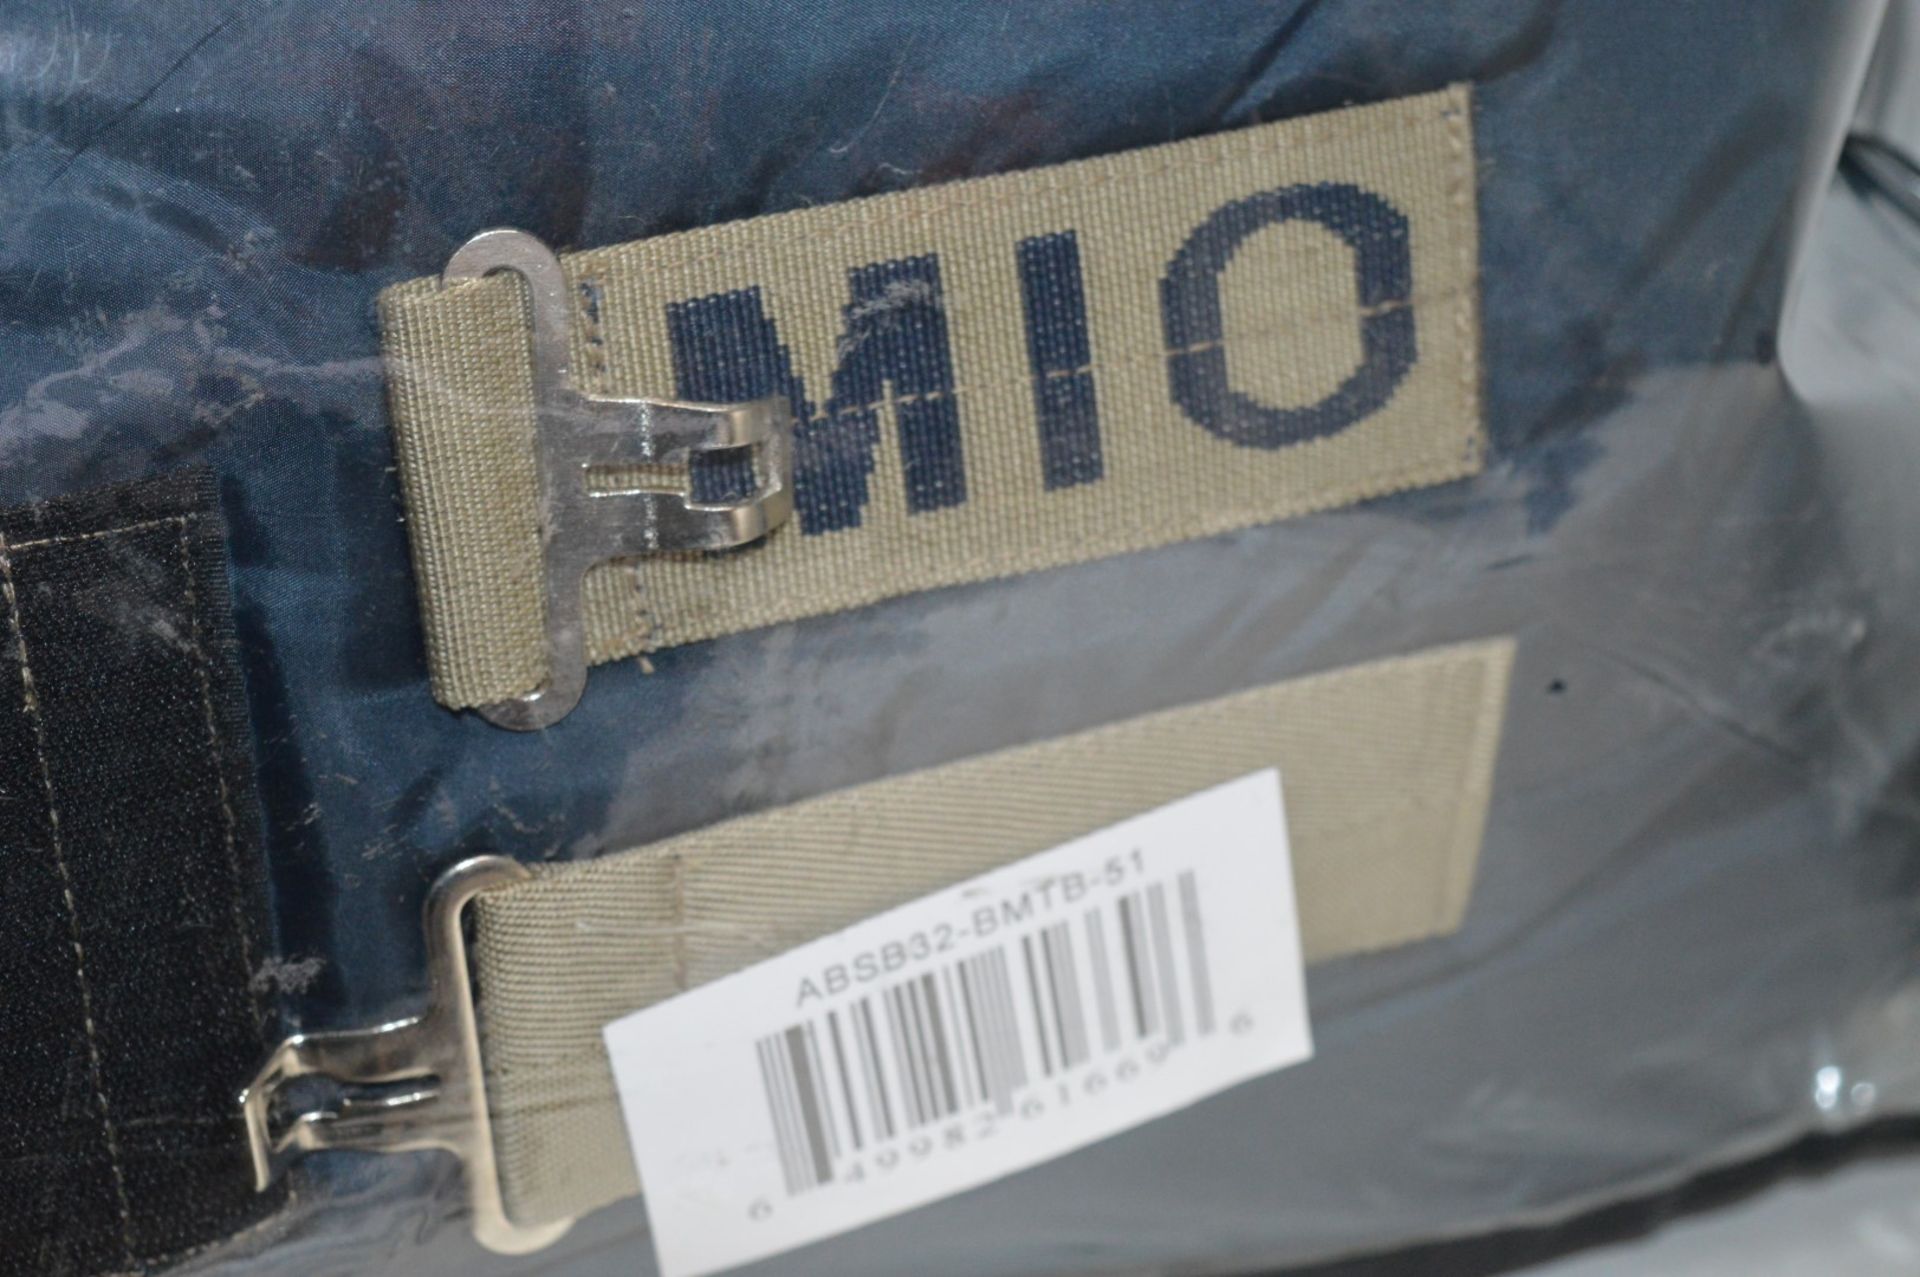 1 x Horseware Mio Insulator - Medium 150g in Navy - Size UK 51 - Product Code ABSB32-BMTB-51 - New - Image 2 of 5